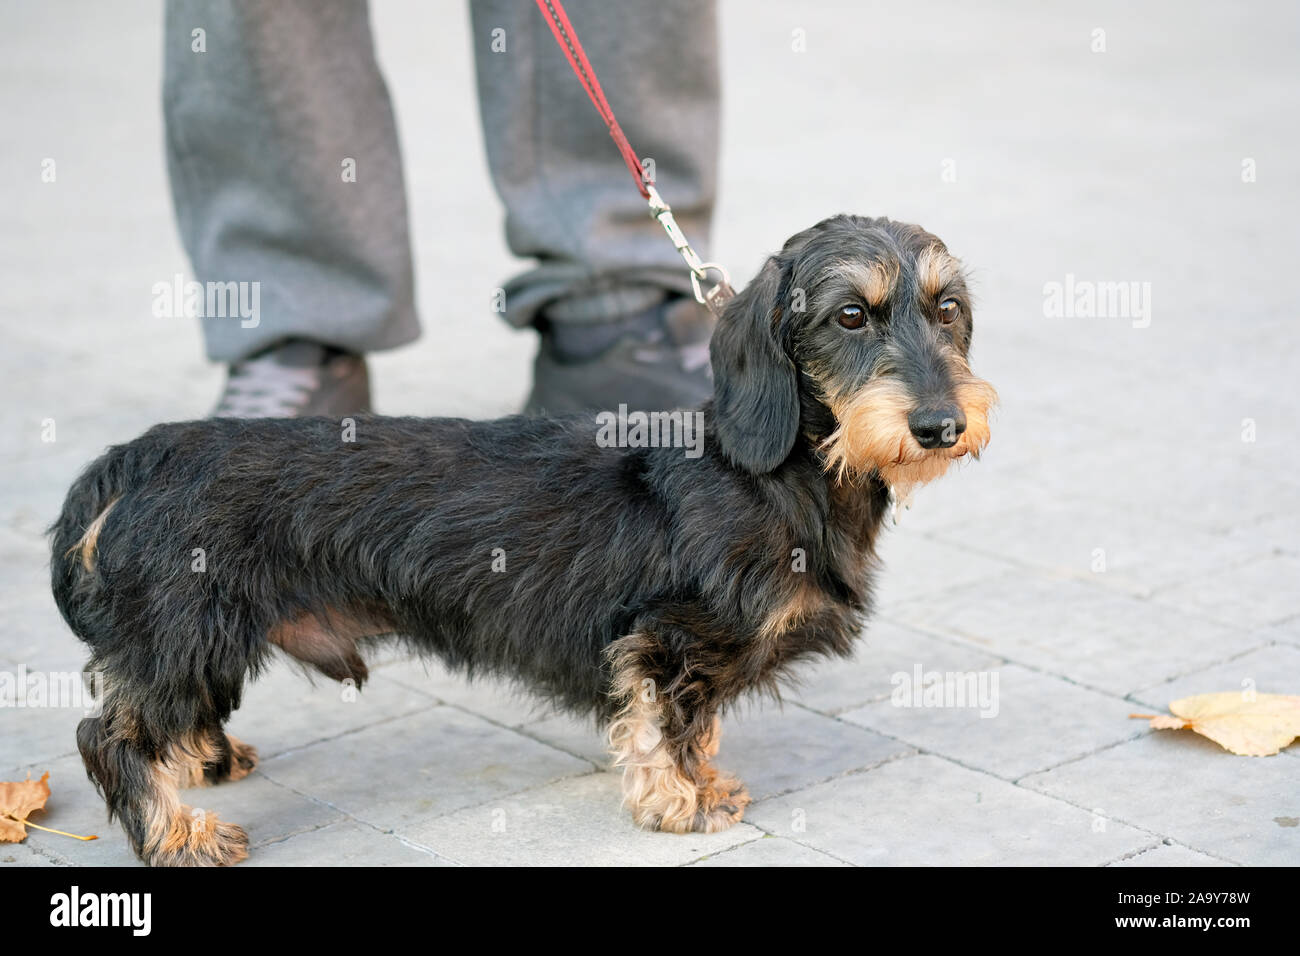 Black dachshund with brown spots on its face and legs. Miniature wire-haired dachshund on a red leash, stands on a gray paving slab at the feet of the Stock Photo